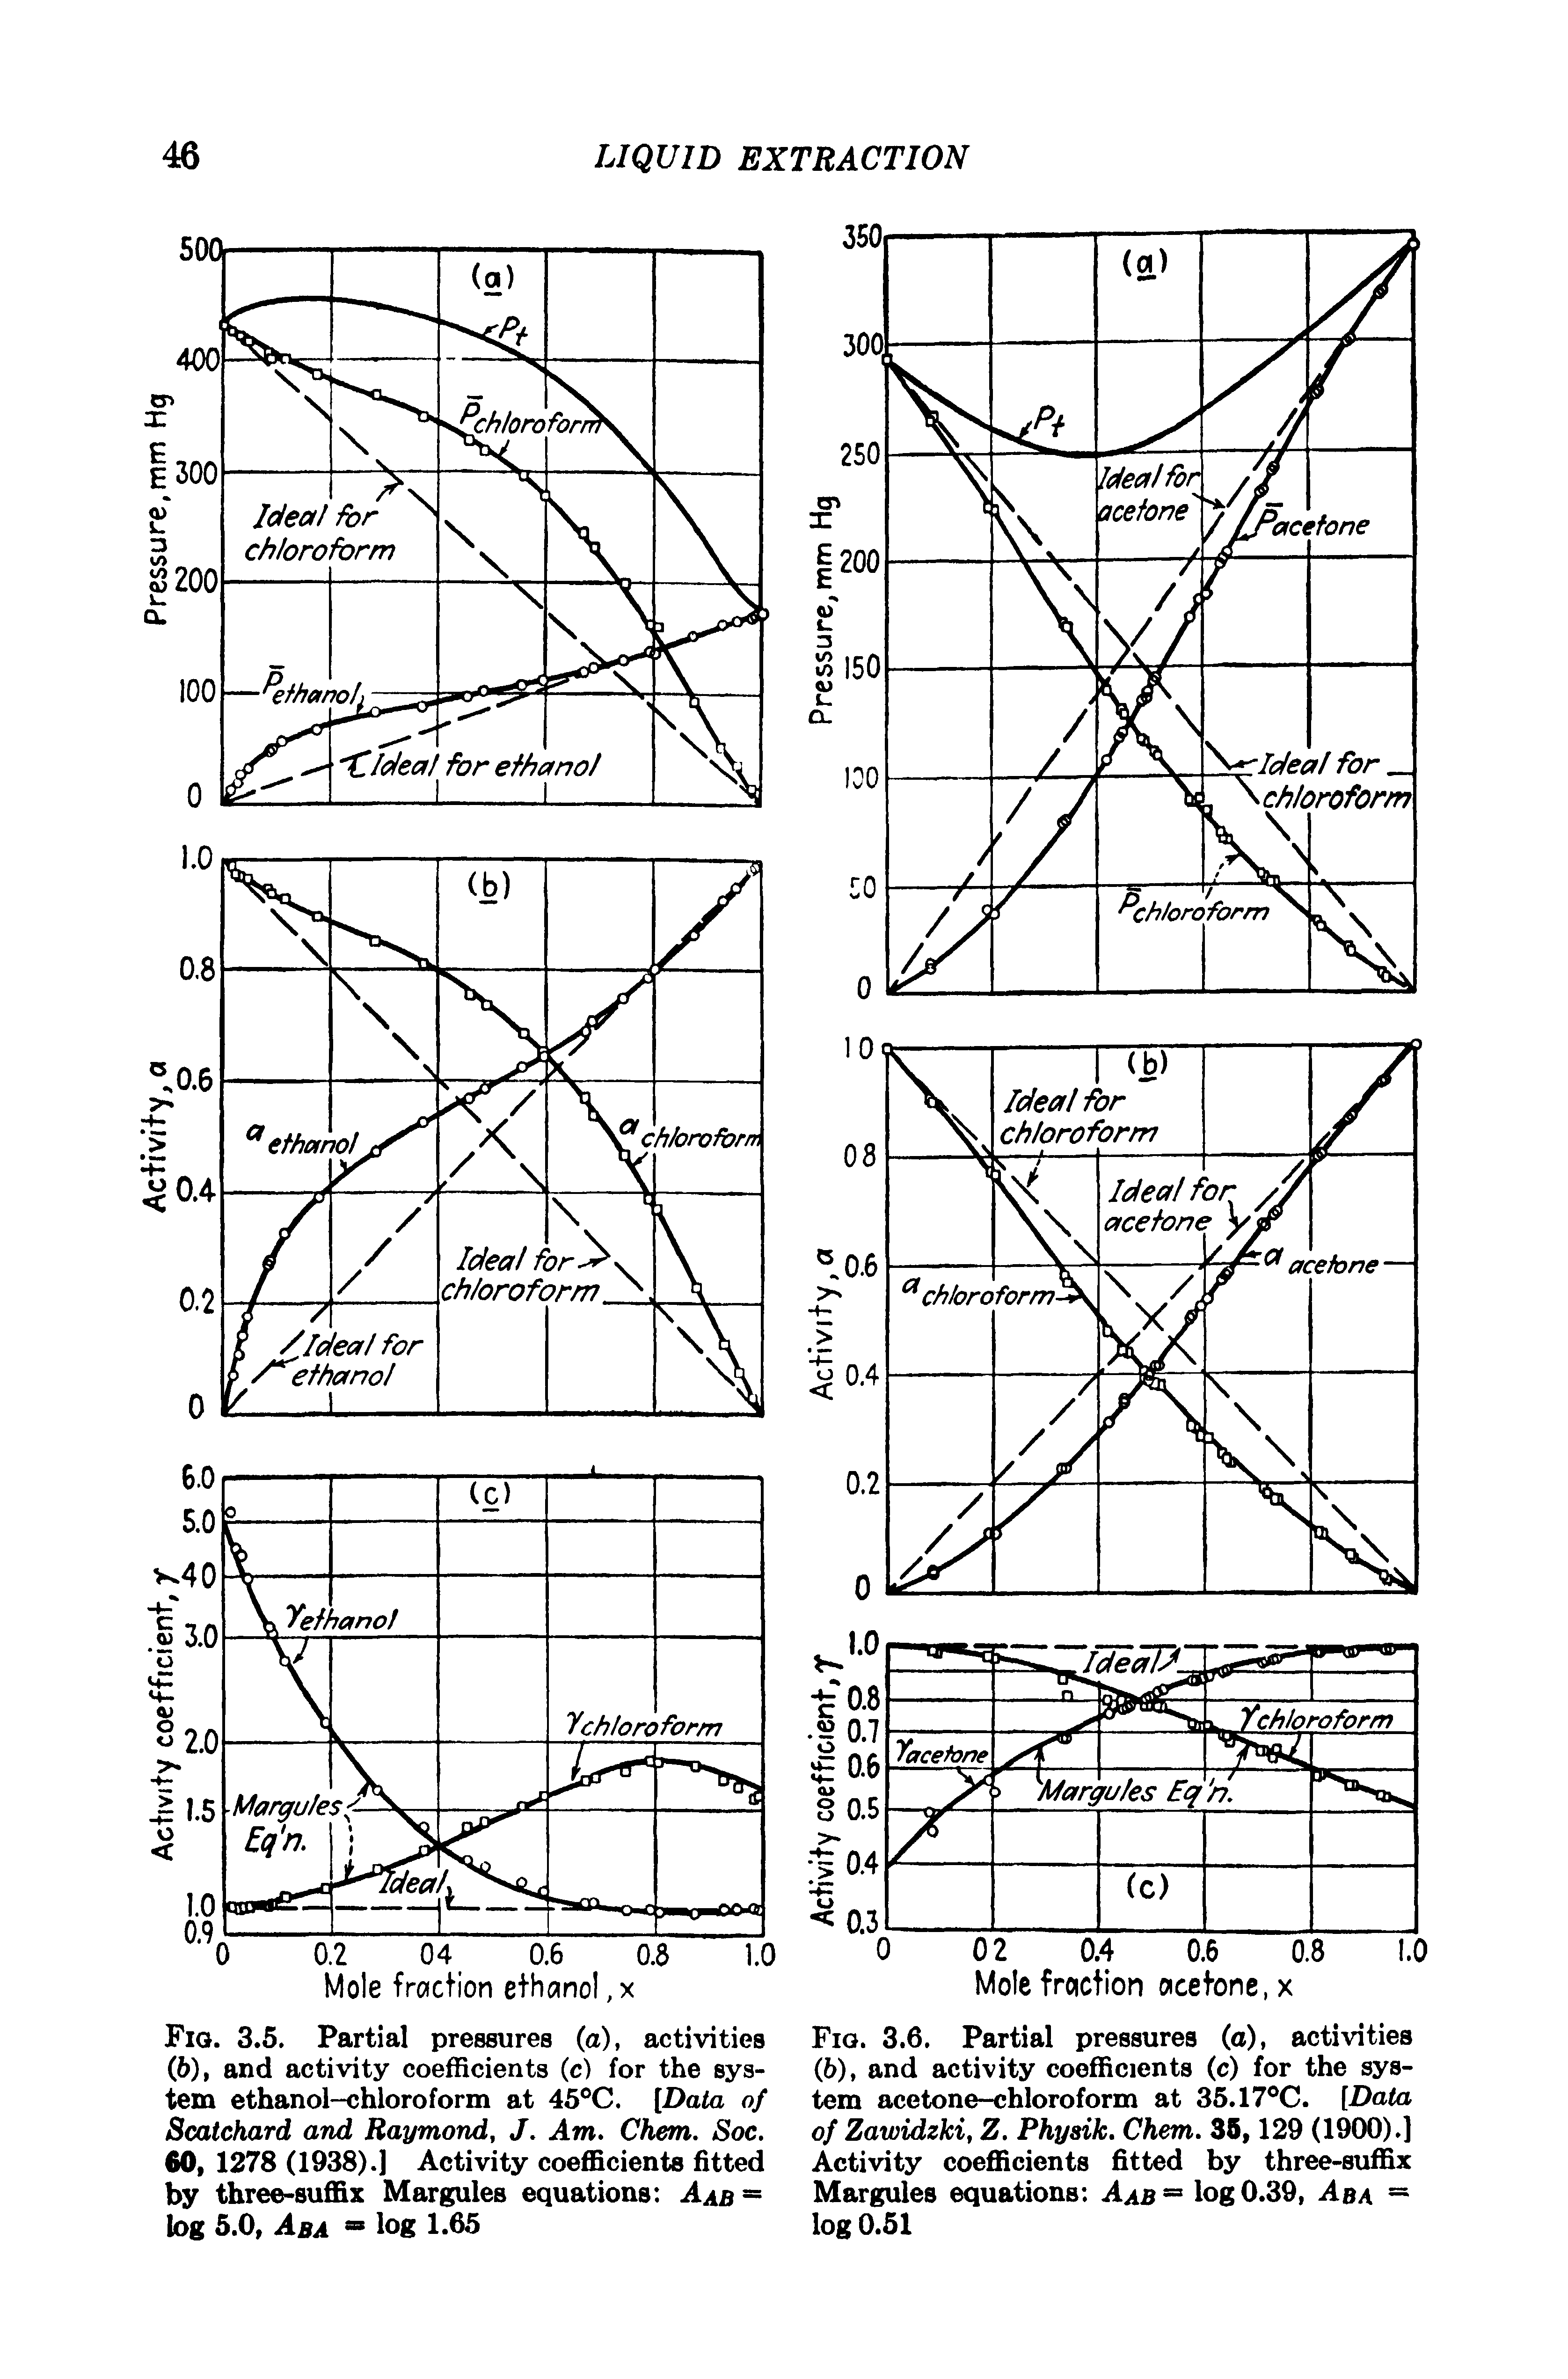 Fig. 3.6. Partial pressures (o), activities (6), and activity coefficients (c) for the system acetone-chloroform at 35.17 C. [Data of Zawidzki, Z. Physik. Chem. 35,129 (1900).] Activity coefficients fitted by three-suffix Margules equations Aab log 0.39, Aba log 0.51...